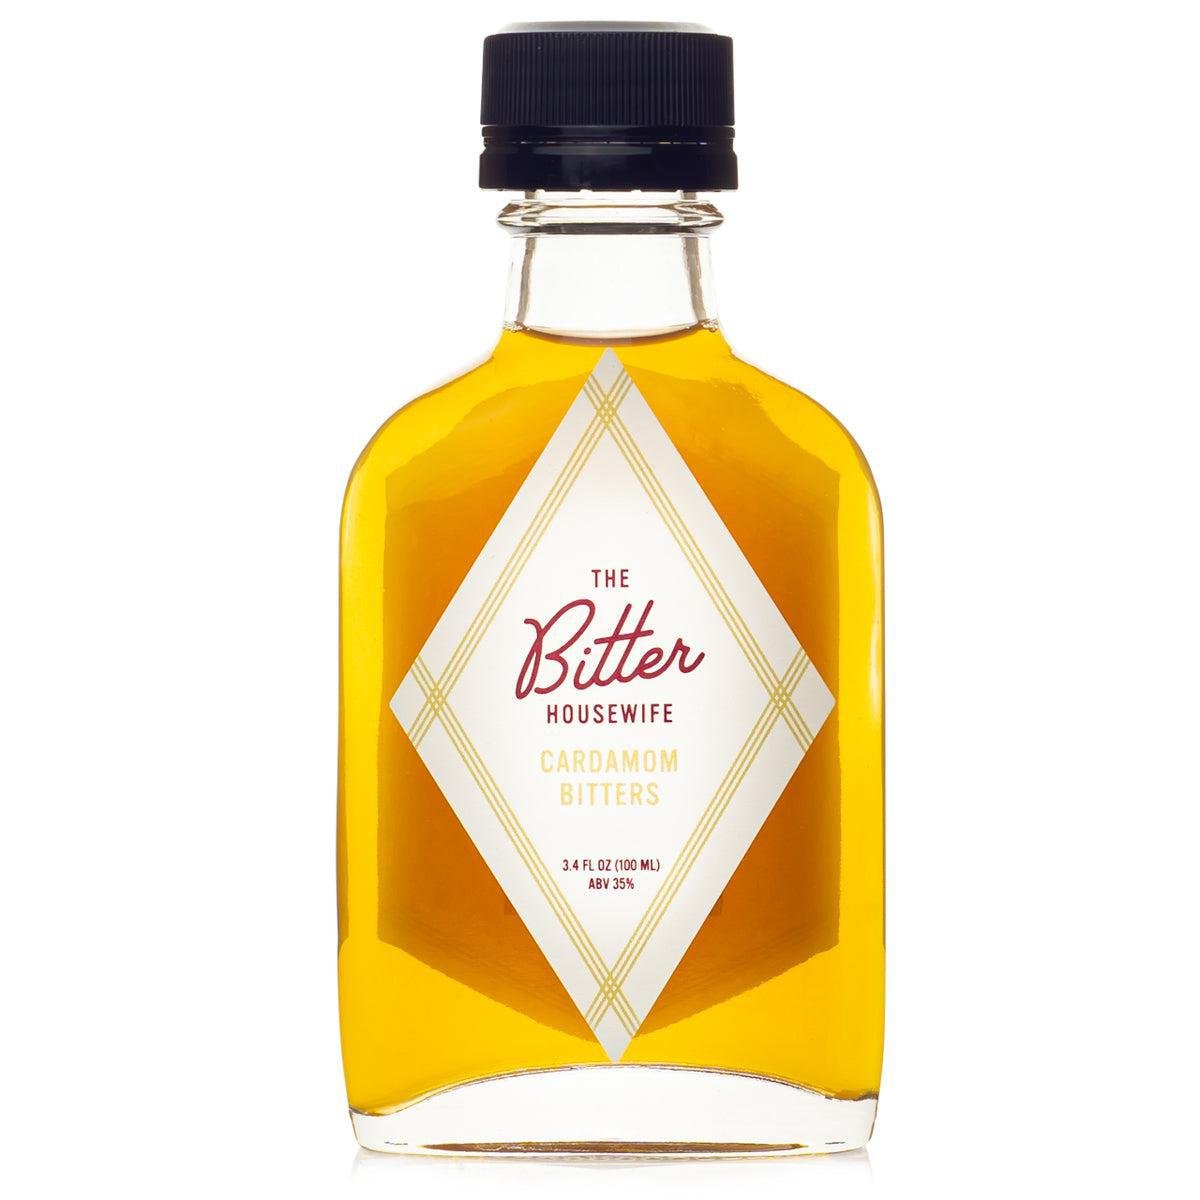 The Bitter Housewife - Cardamom Bitters (100ML) - The Epicurean Trader